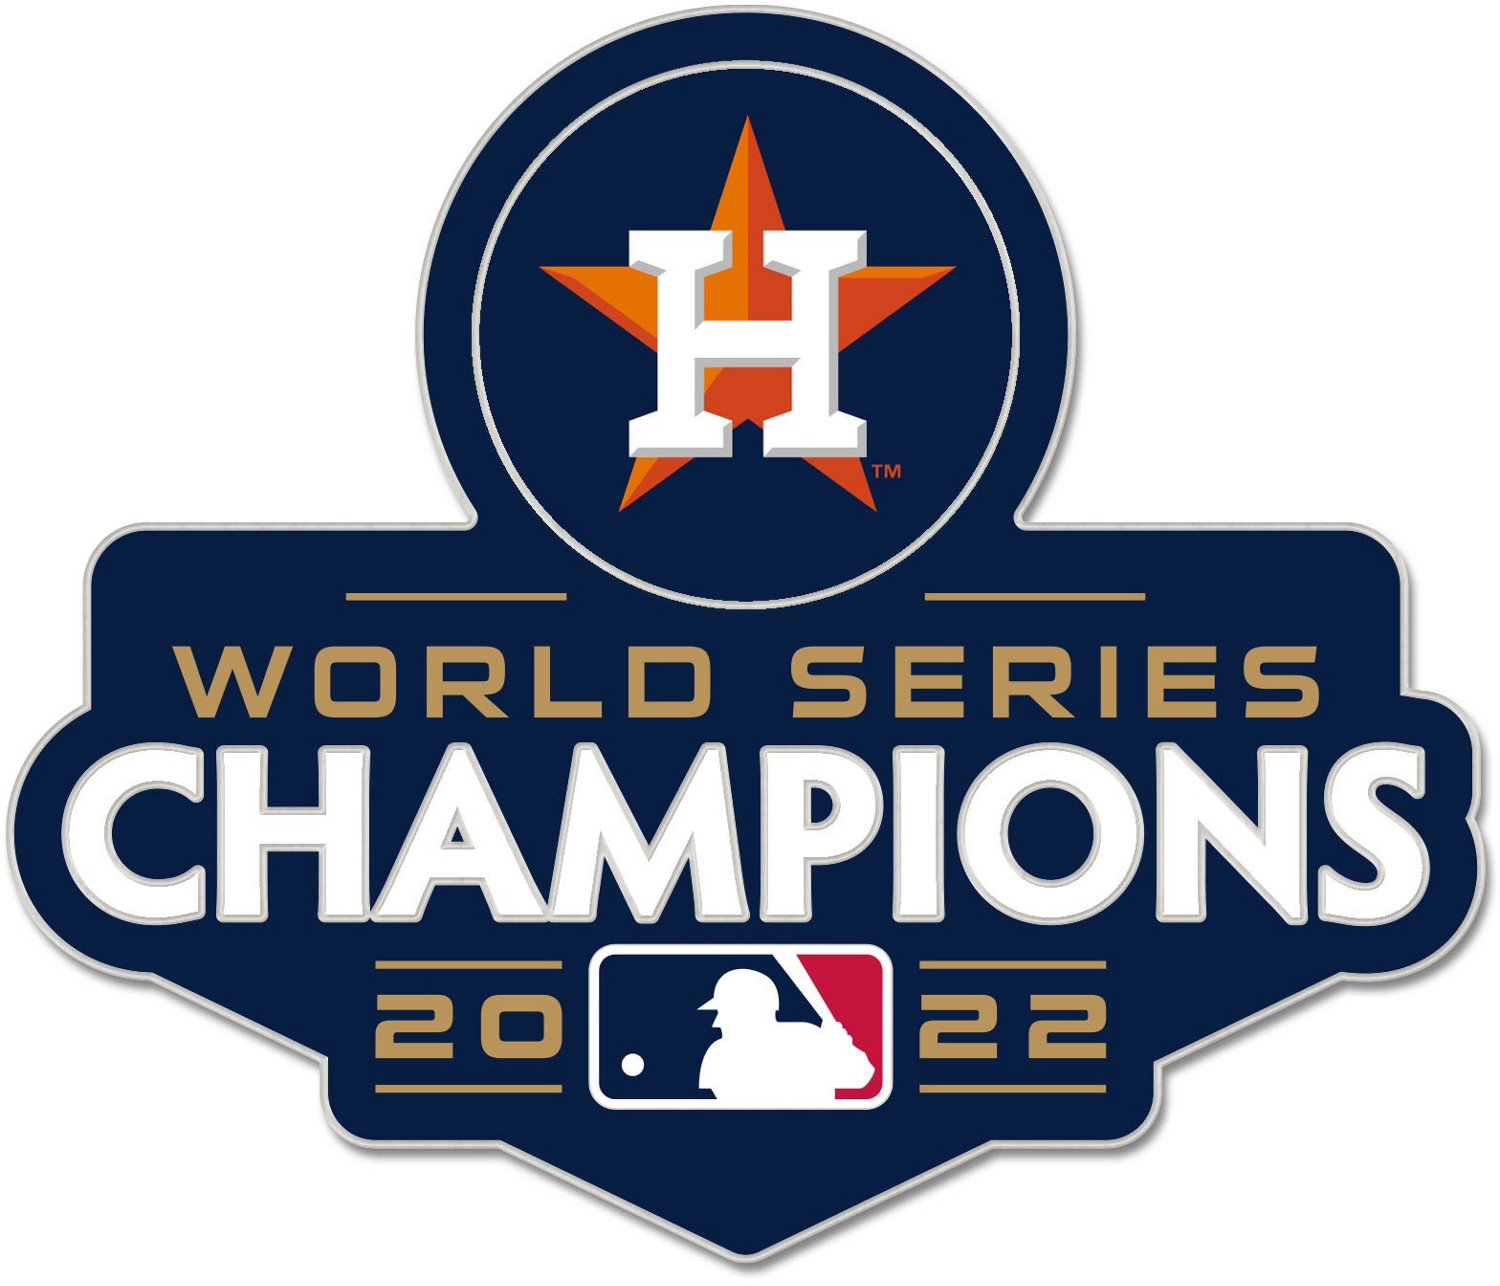 Houston Astros WinCraft 2022 World Series Collector Pin